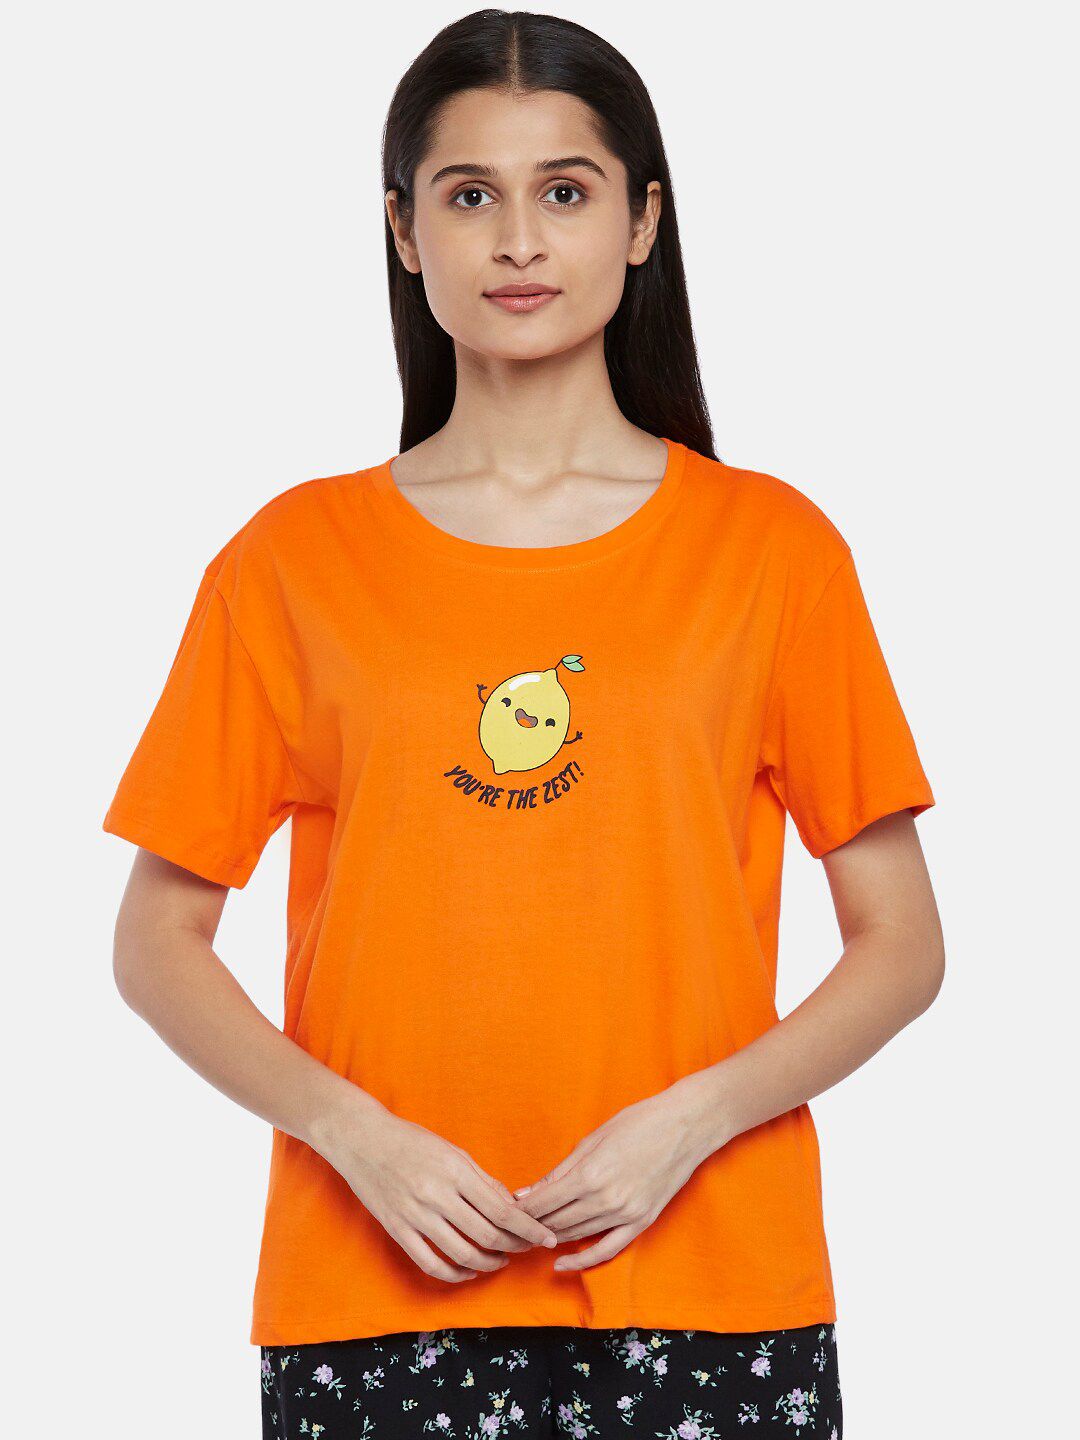 Dreamz by Pantaloons Orange Pure Cotton Lounge tshirt Price in India